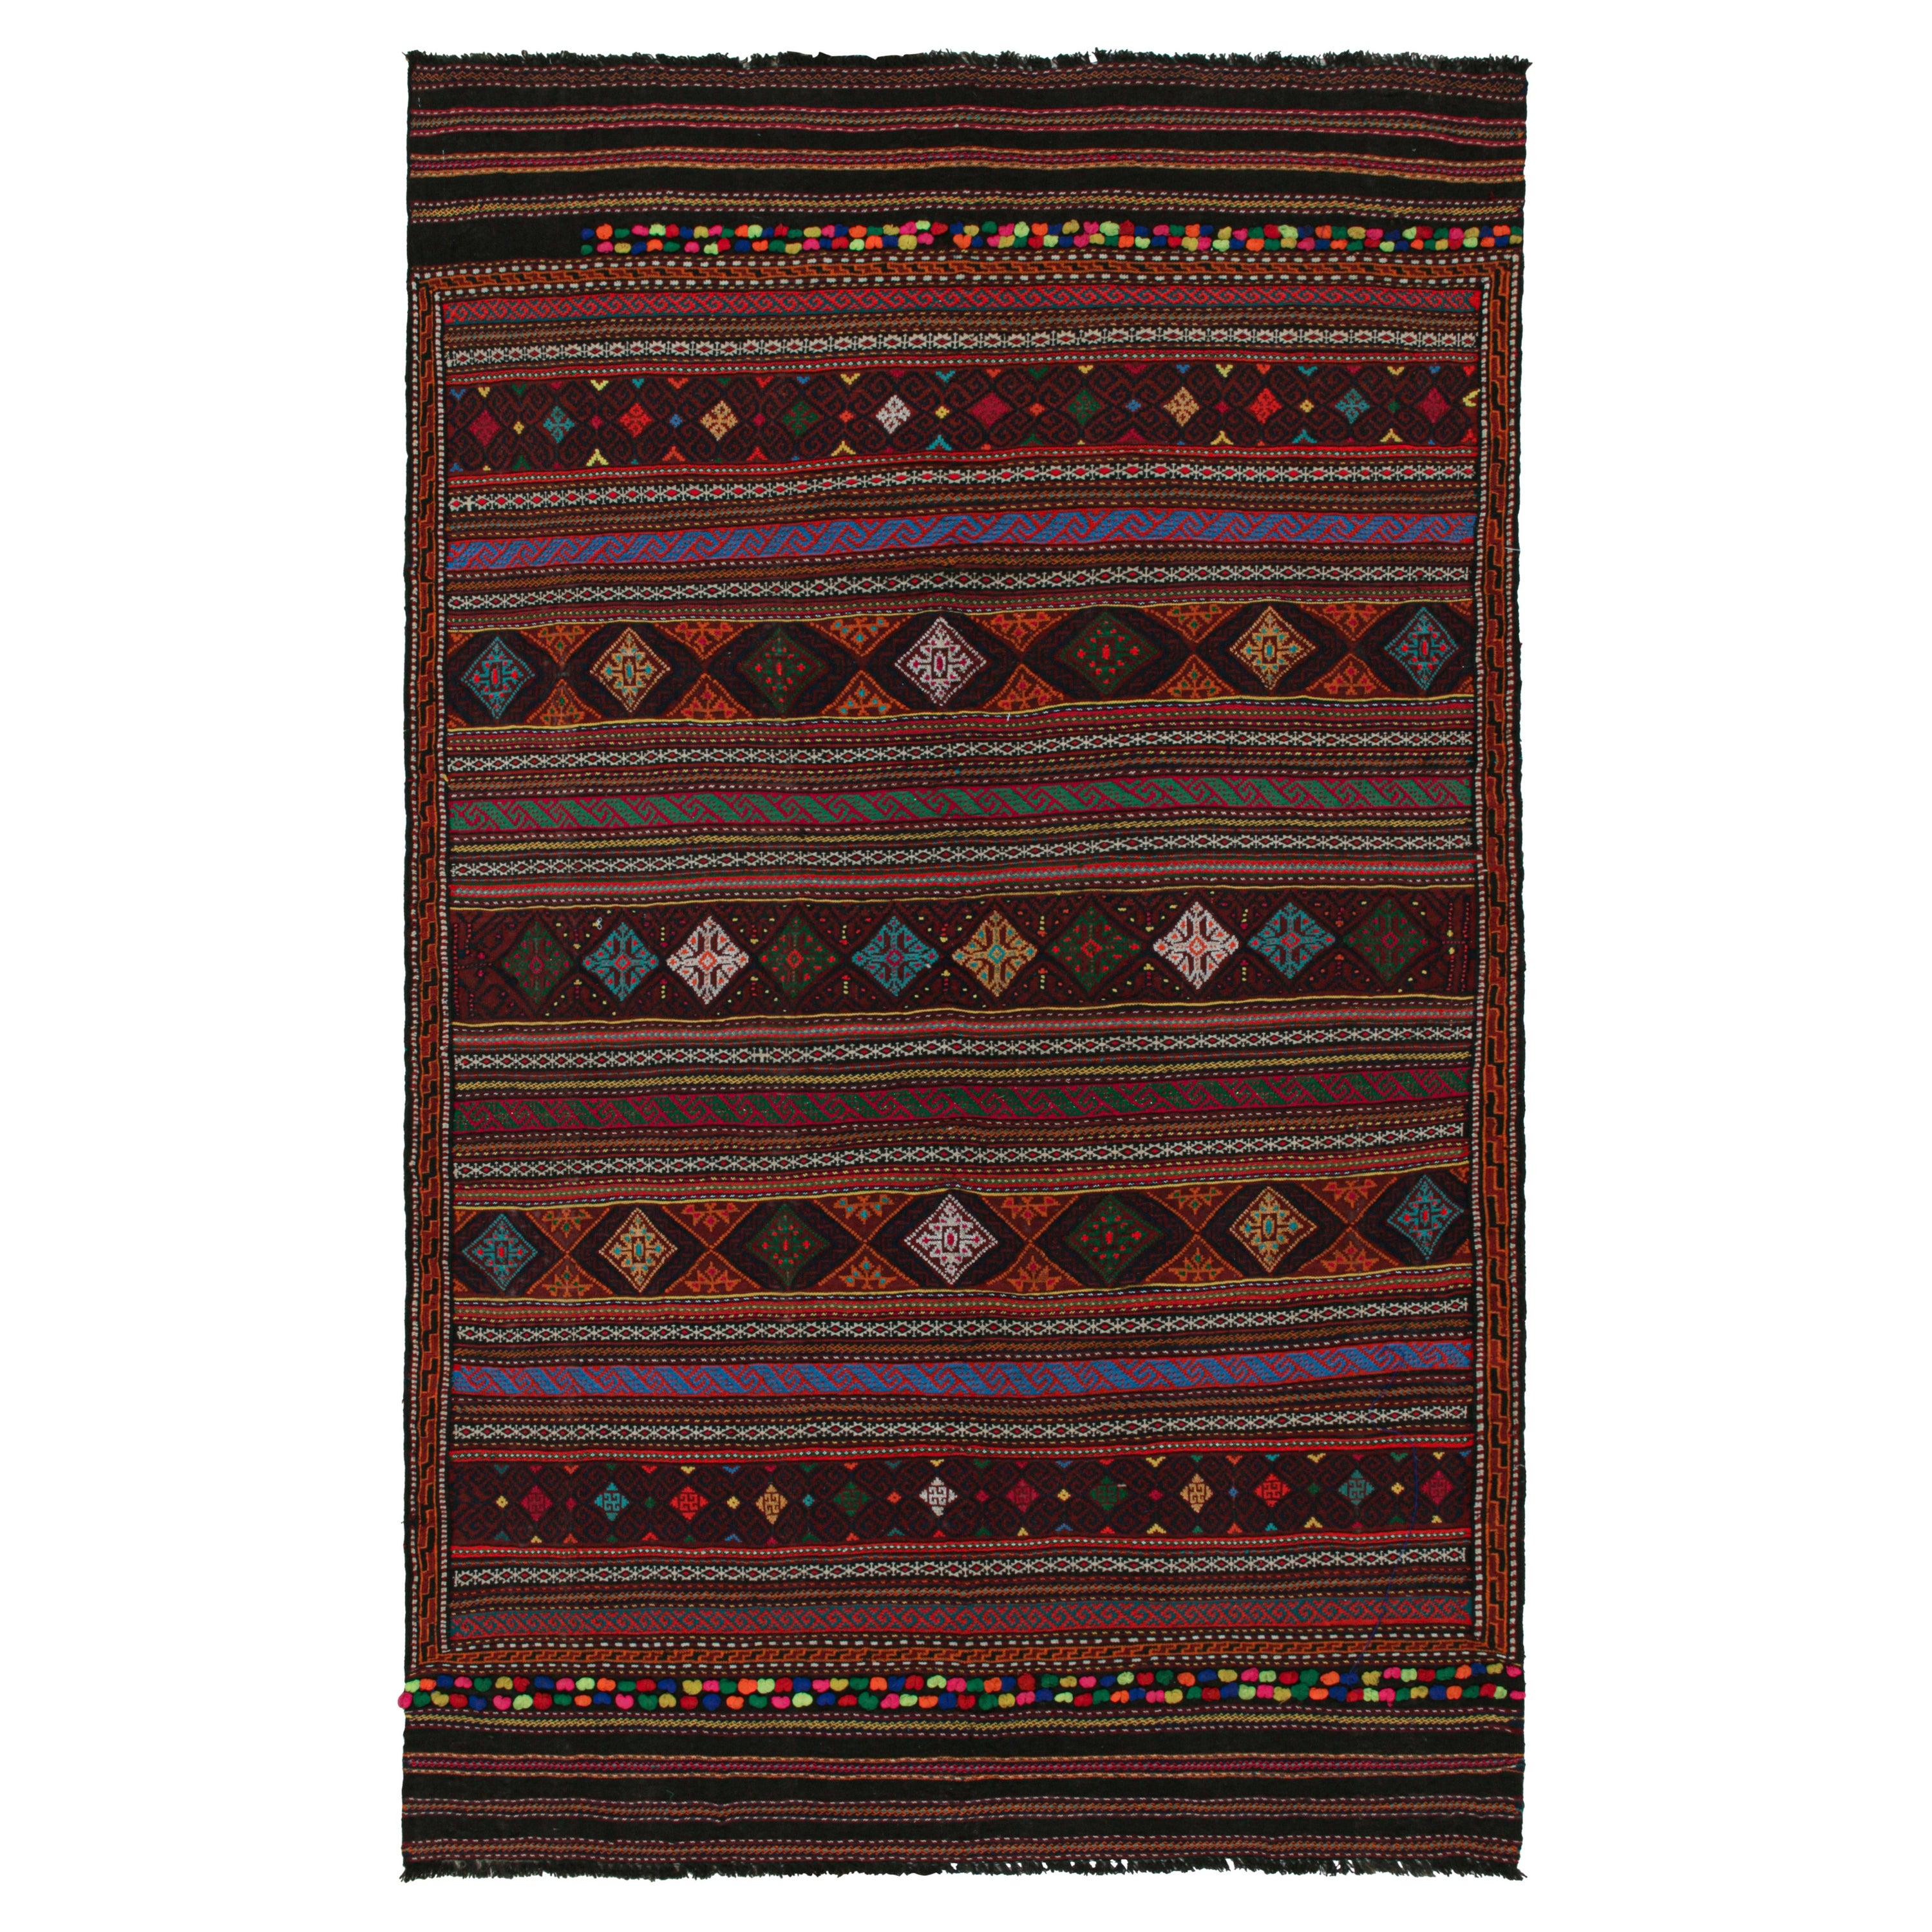 Vintage Baluch Tribal Kilim with Colorful Geometric Patterns, from Rug & Kilim